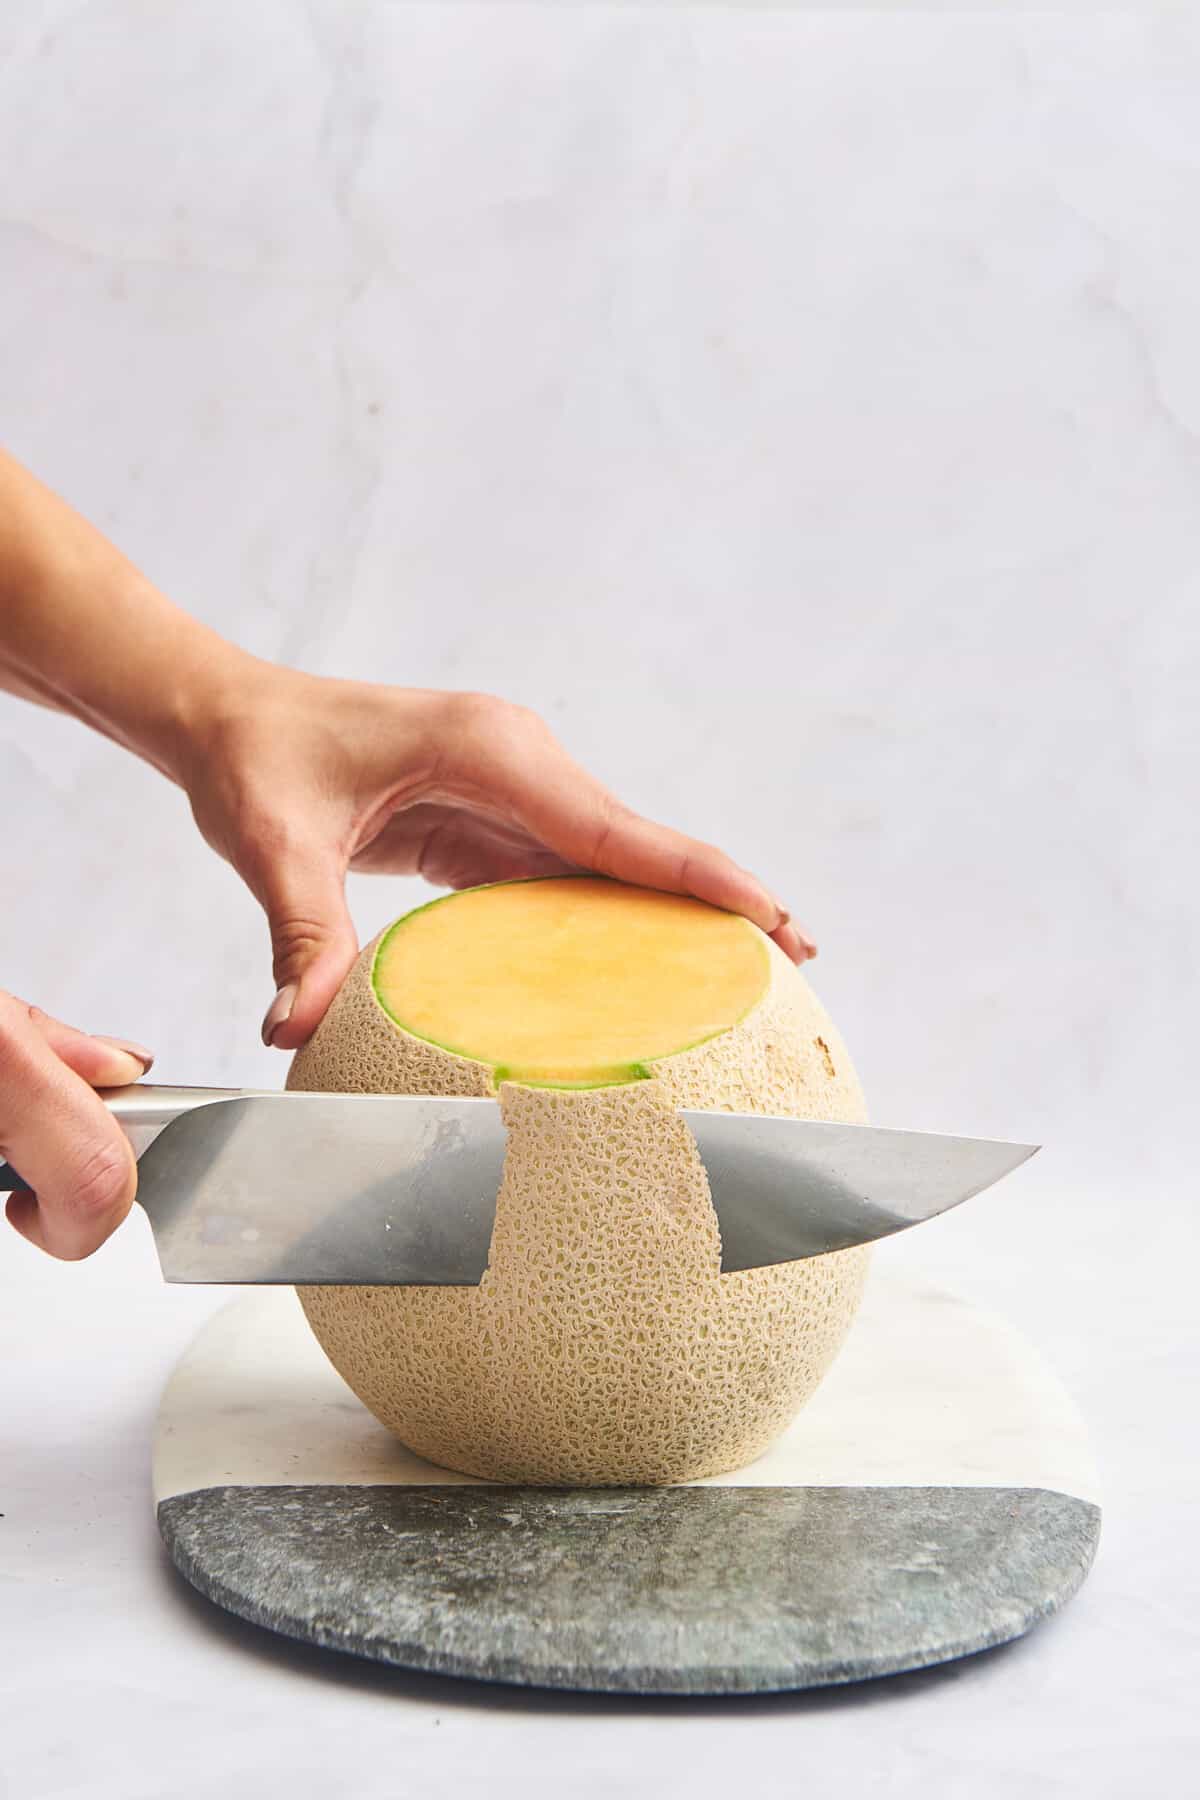 The skin being removed from a cantaloupe. 